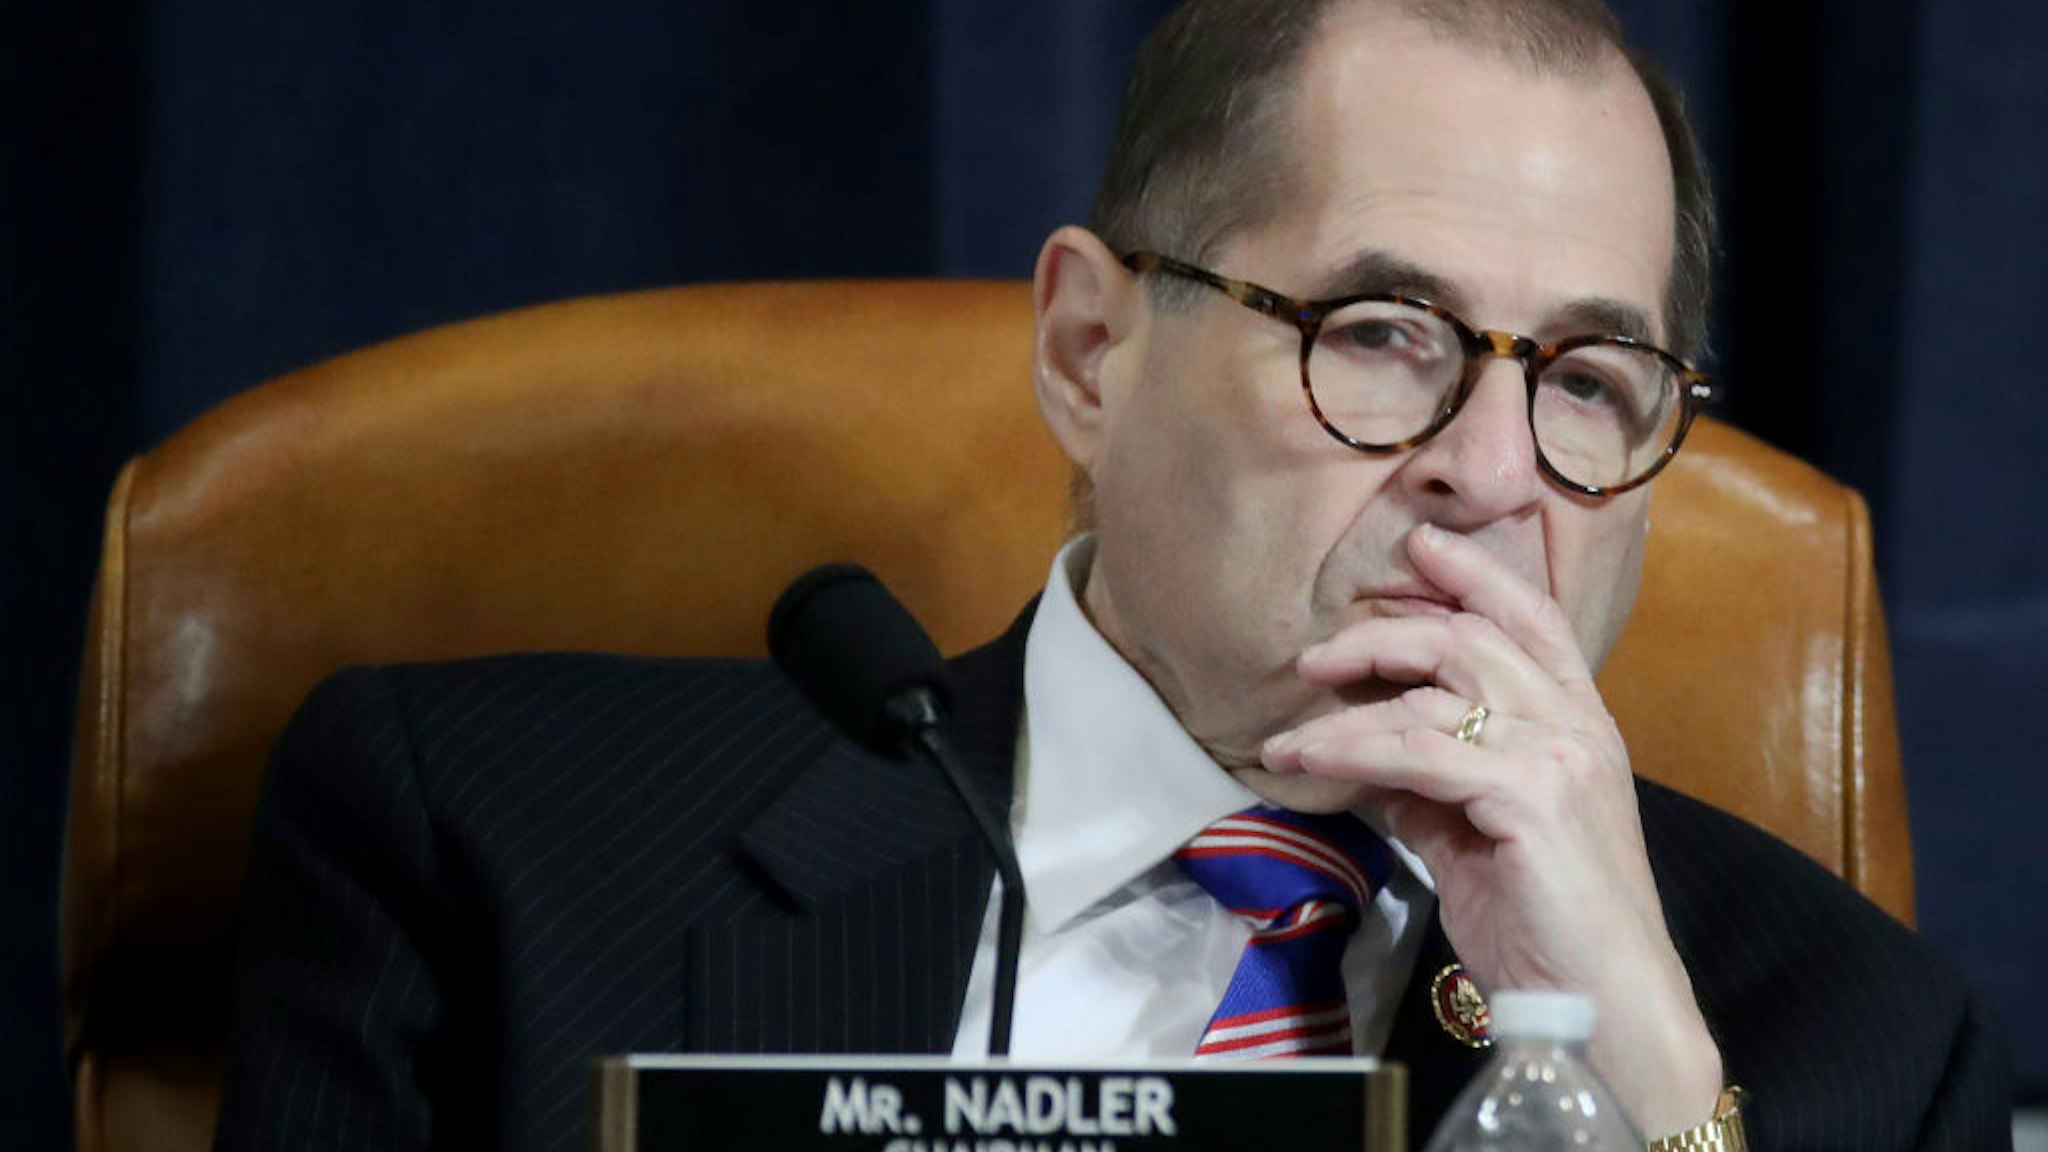 WASHINGTON, DC - DECEMBER 04: Committee chairman Rep. Jerry Nadler (D-NY) listens as constitutional scholars testify before the House Judiciary Committee in the Longworth House Office Building on Capitol Hill December 4, 2019 in Washington, DC. This is the first hearing held by the House Judiciary Committee in the impeachment inquiry against U.S. President Donald Trump, whom House Democrats say held back military aid for Ukraine while demanding it investigate his political rivals. The Judiciary Committee will decide whether to draft official articles of impeachment against President Trump to be voted on by the full House of Representatives.